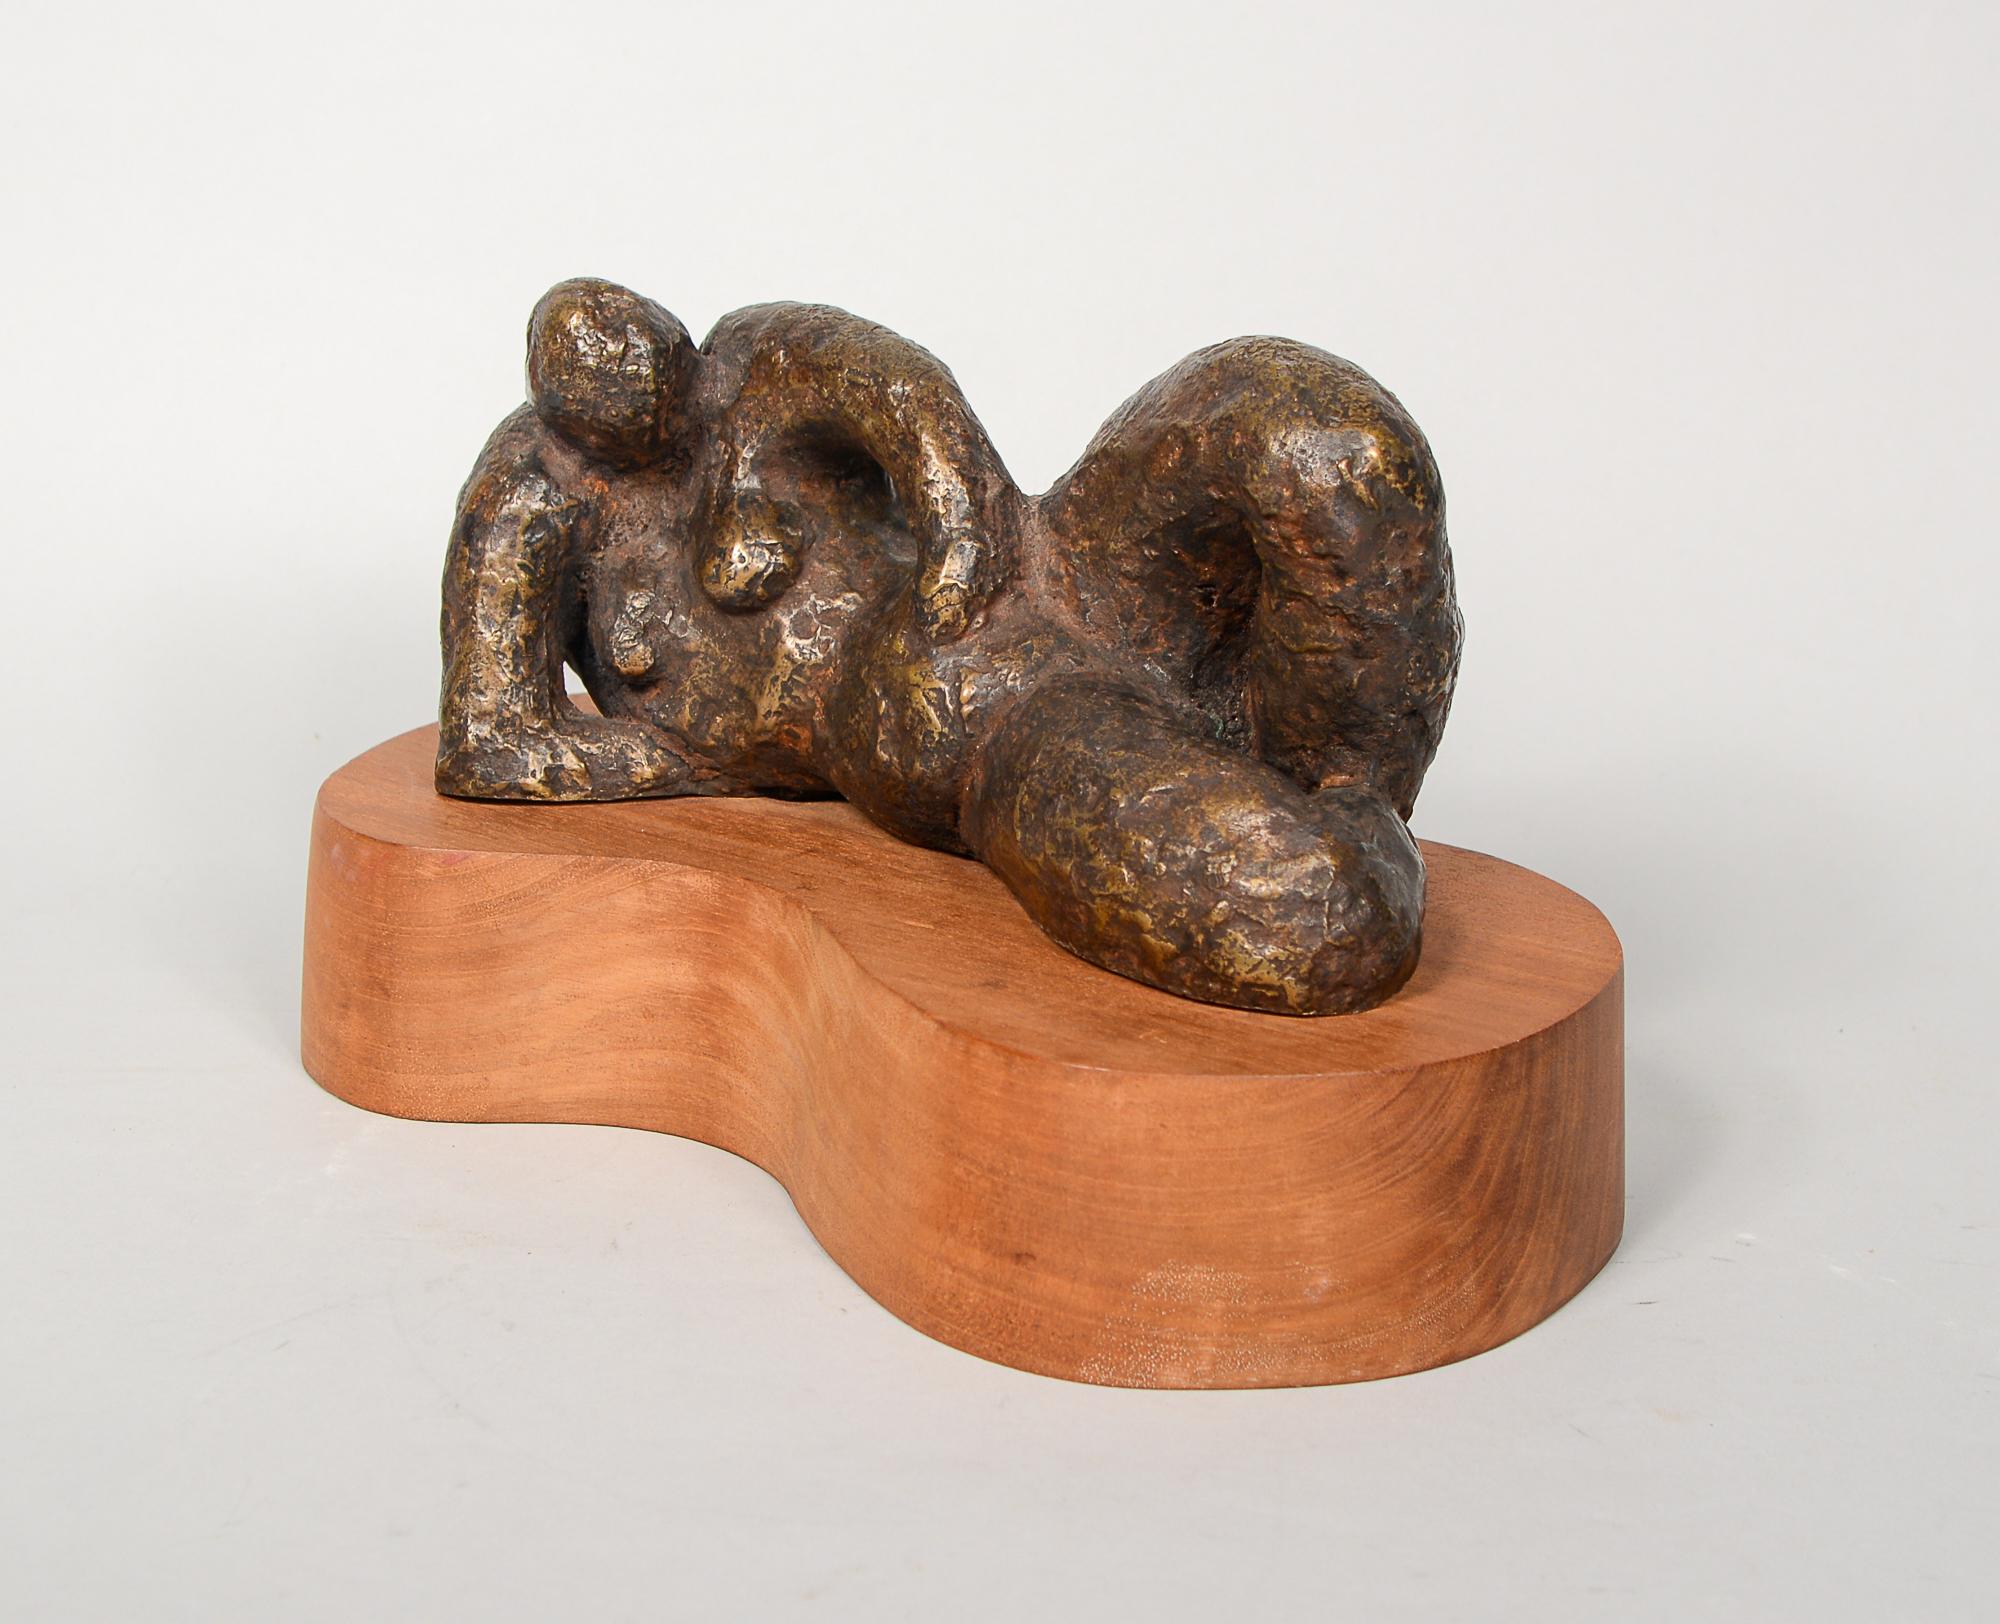 Bronze figurative sculpture by Jean (Bloomfield) Byington. Jean is the daughter of the sculptor Elinore Gallas Bloomfield. This sculpture was likely done while she studied fine art at the University of California, Santa Cruz.